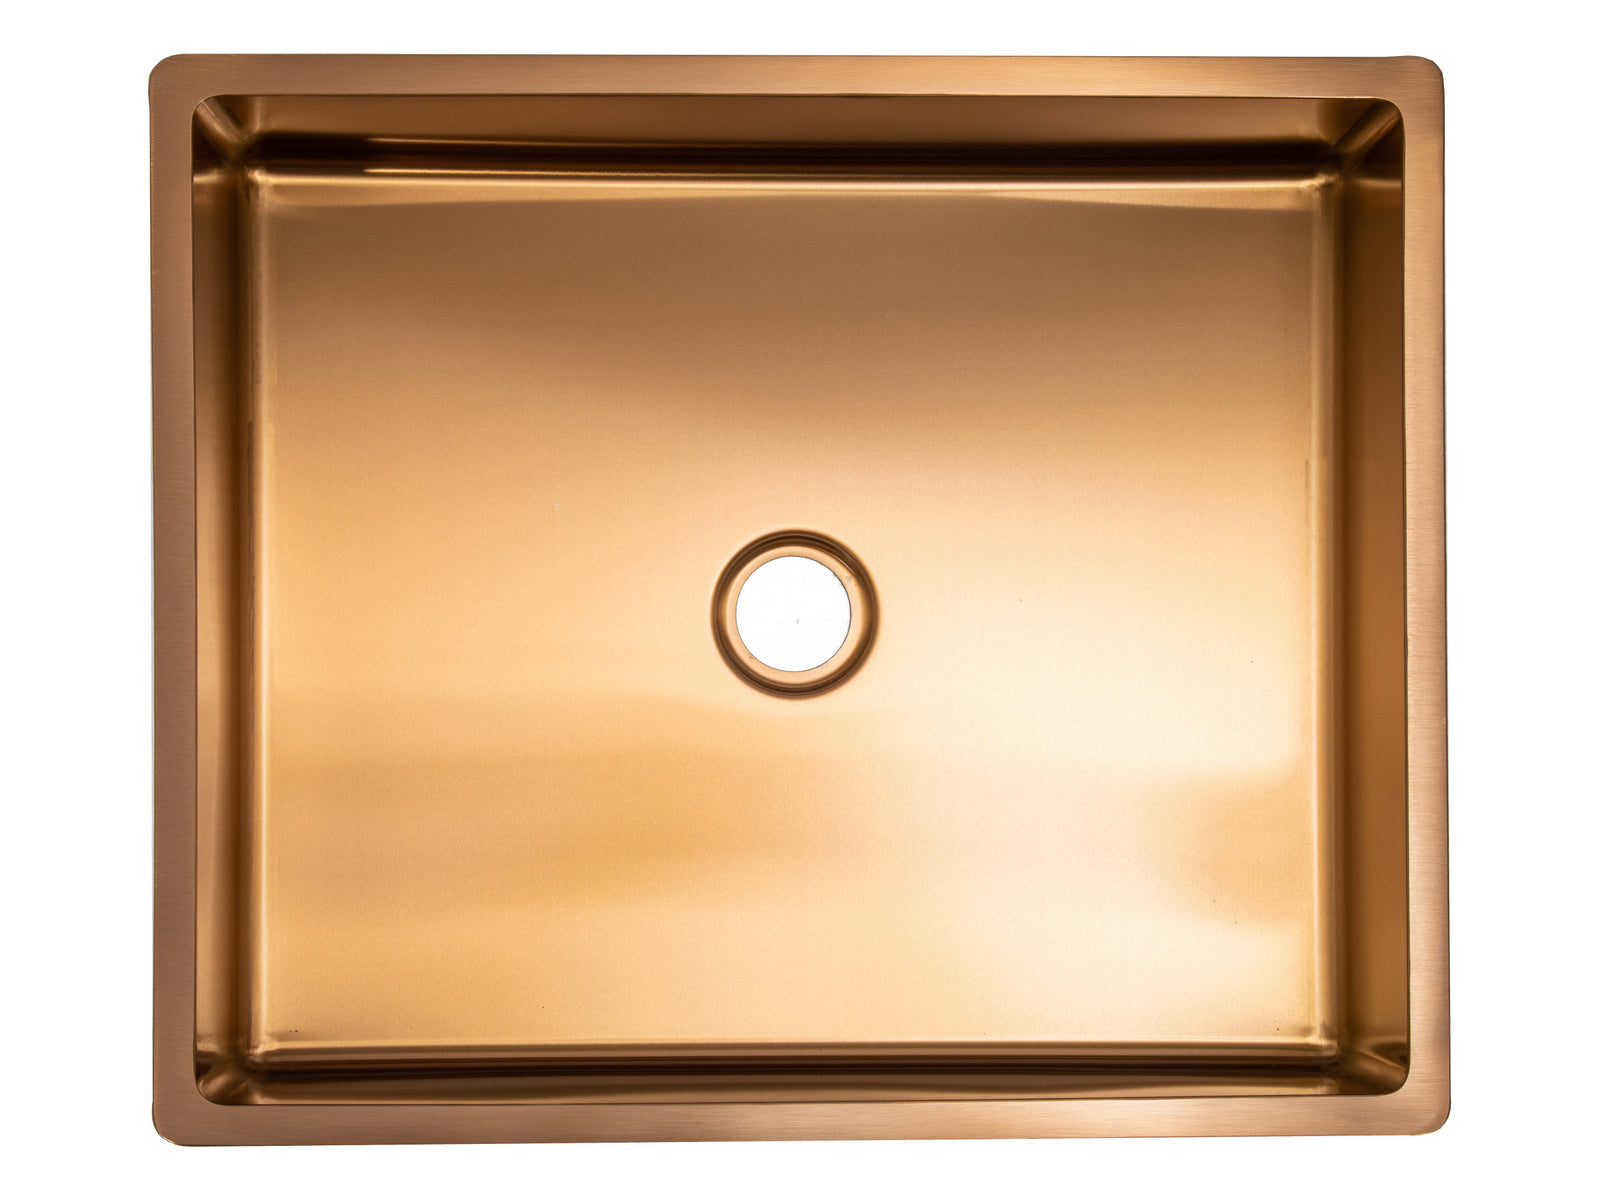 Rectangular 18 3/4" x 15 3/4" Thick Rim Stainless Steel Bathroom Vessel Sink with Drain in Rose Gold